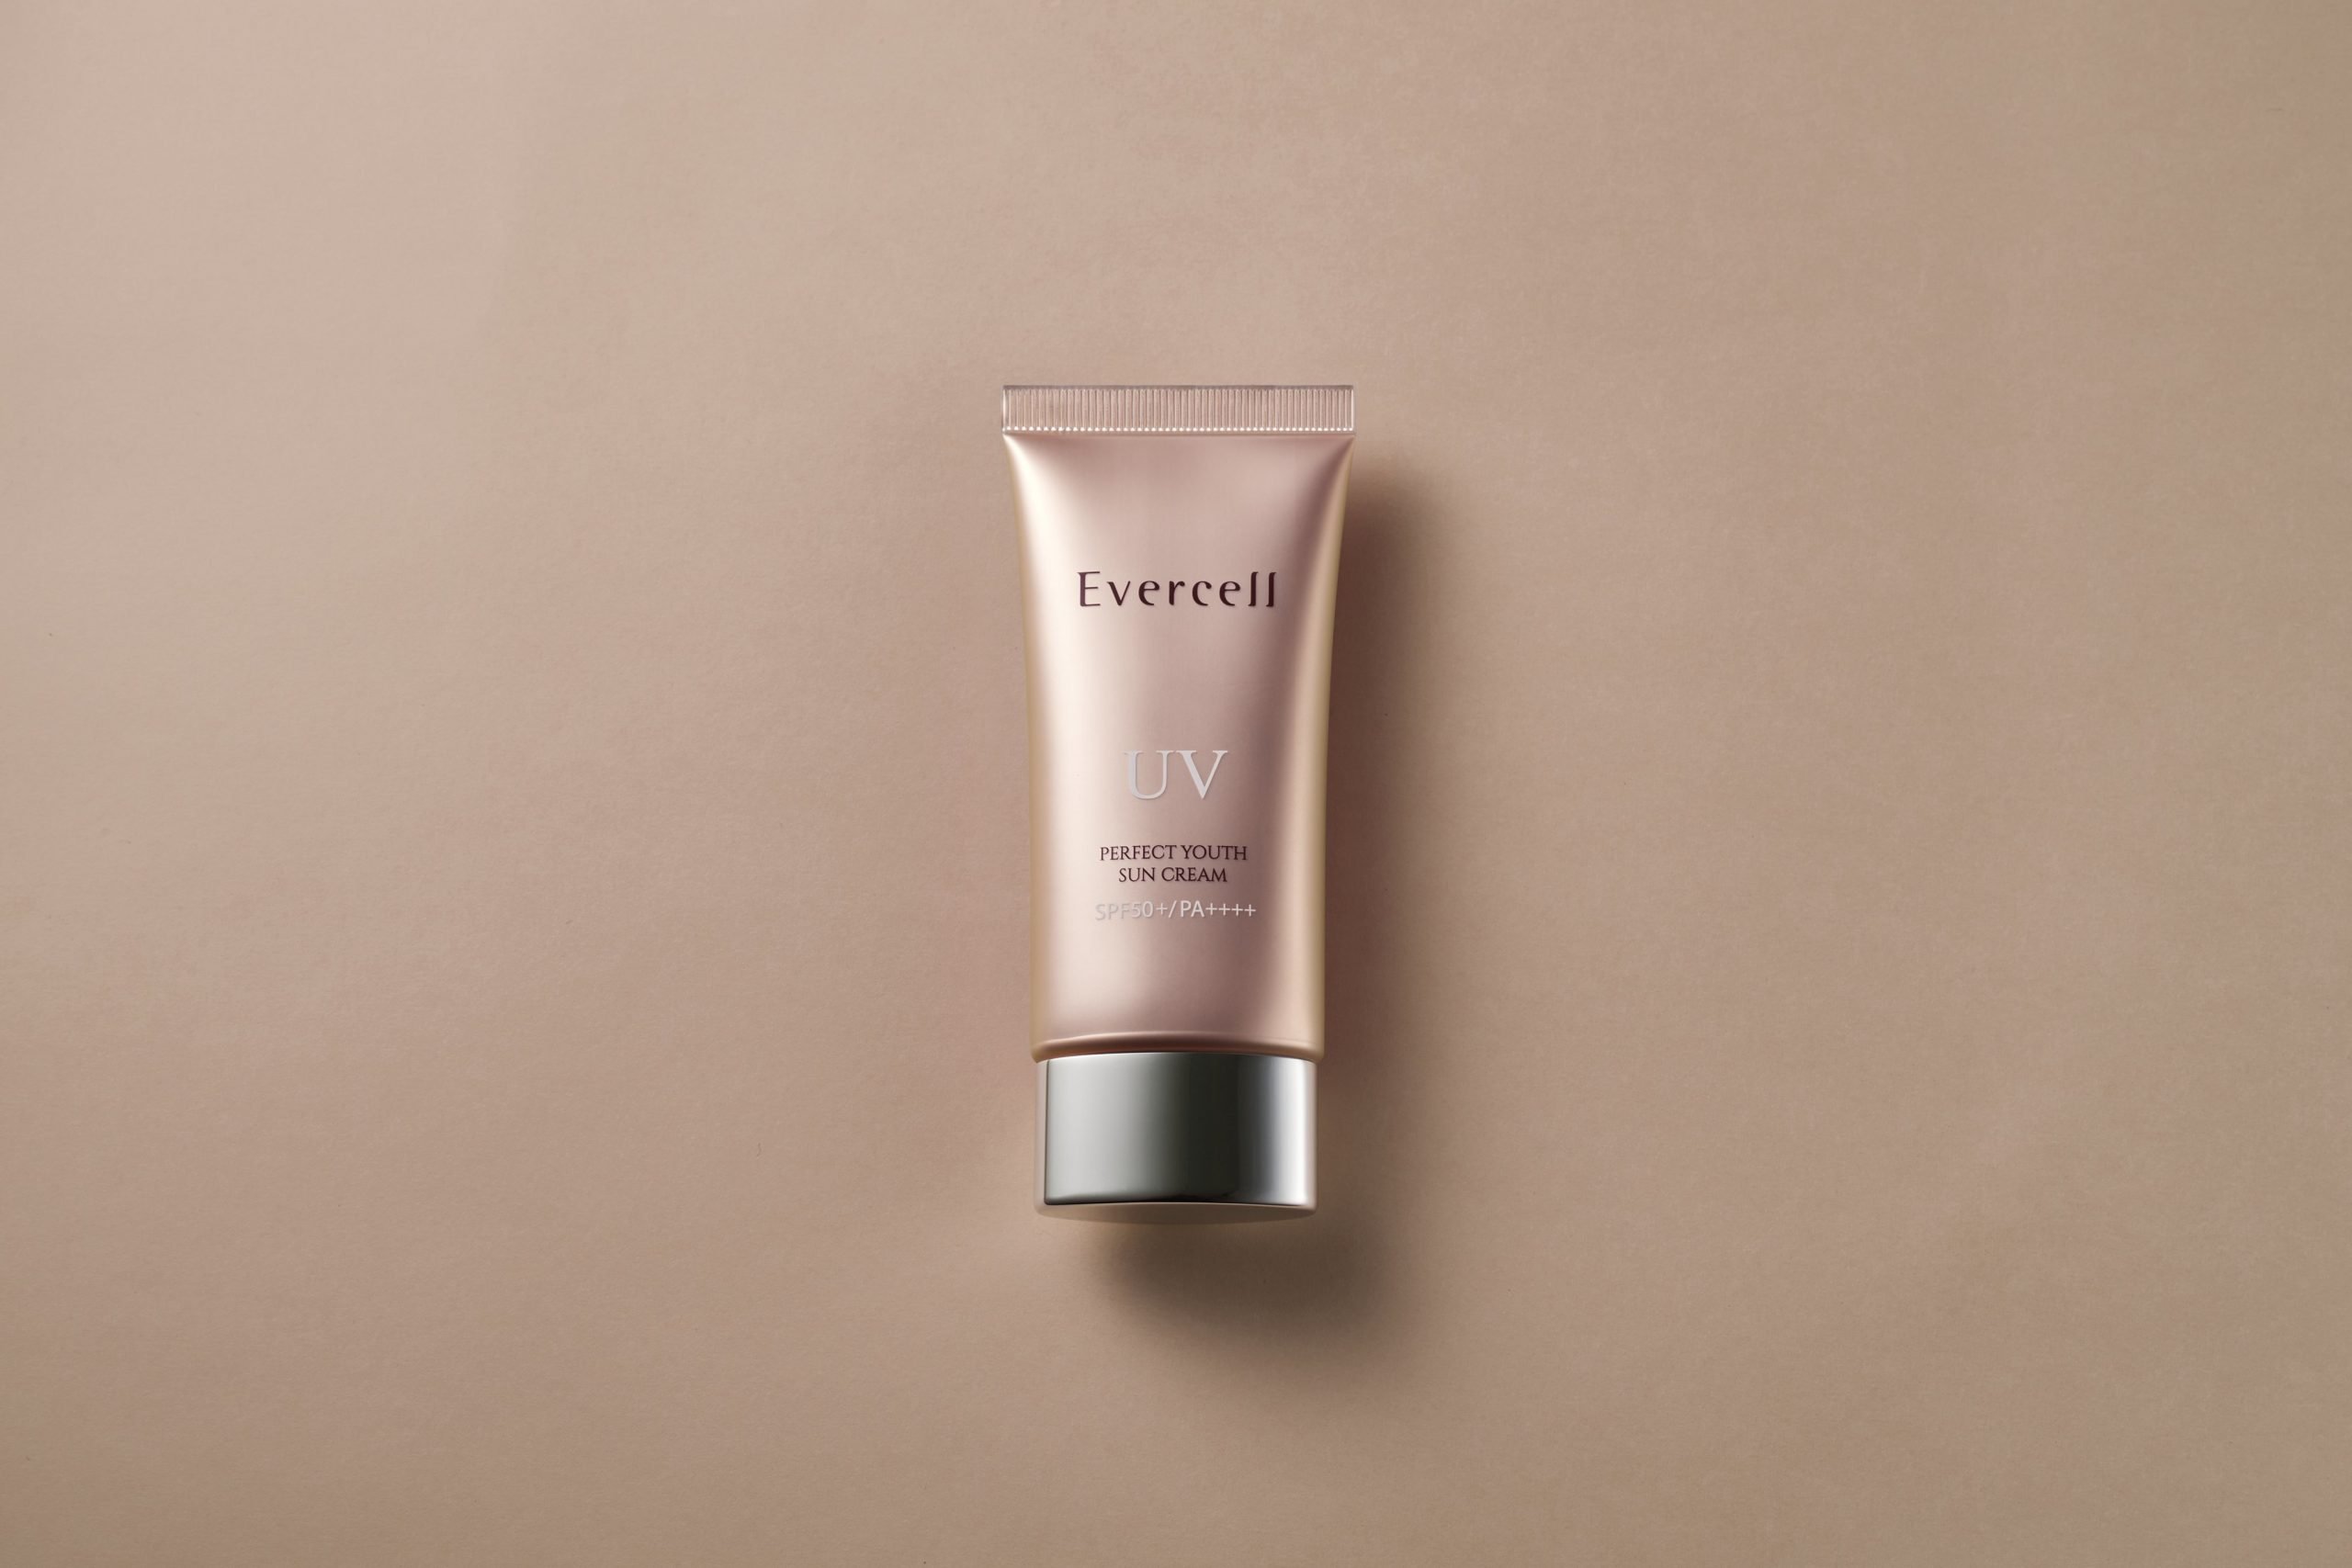 EVERCELL UV  PERFECTION YOUTH